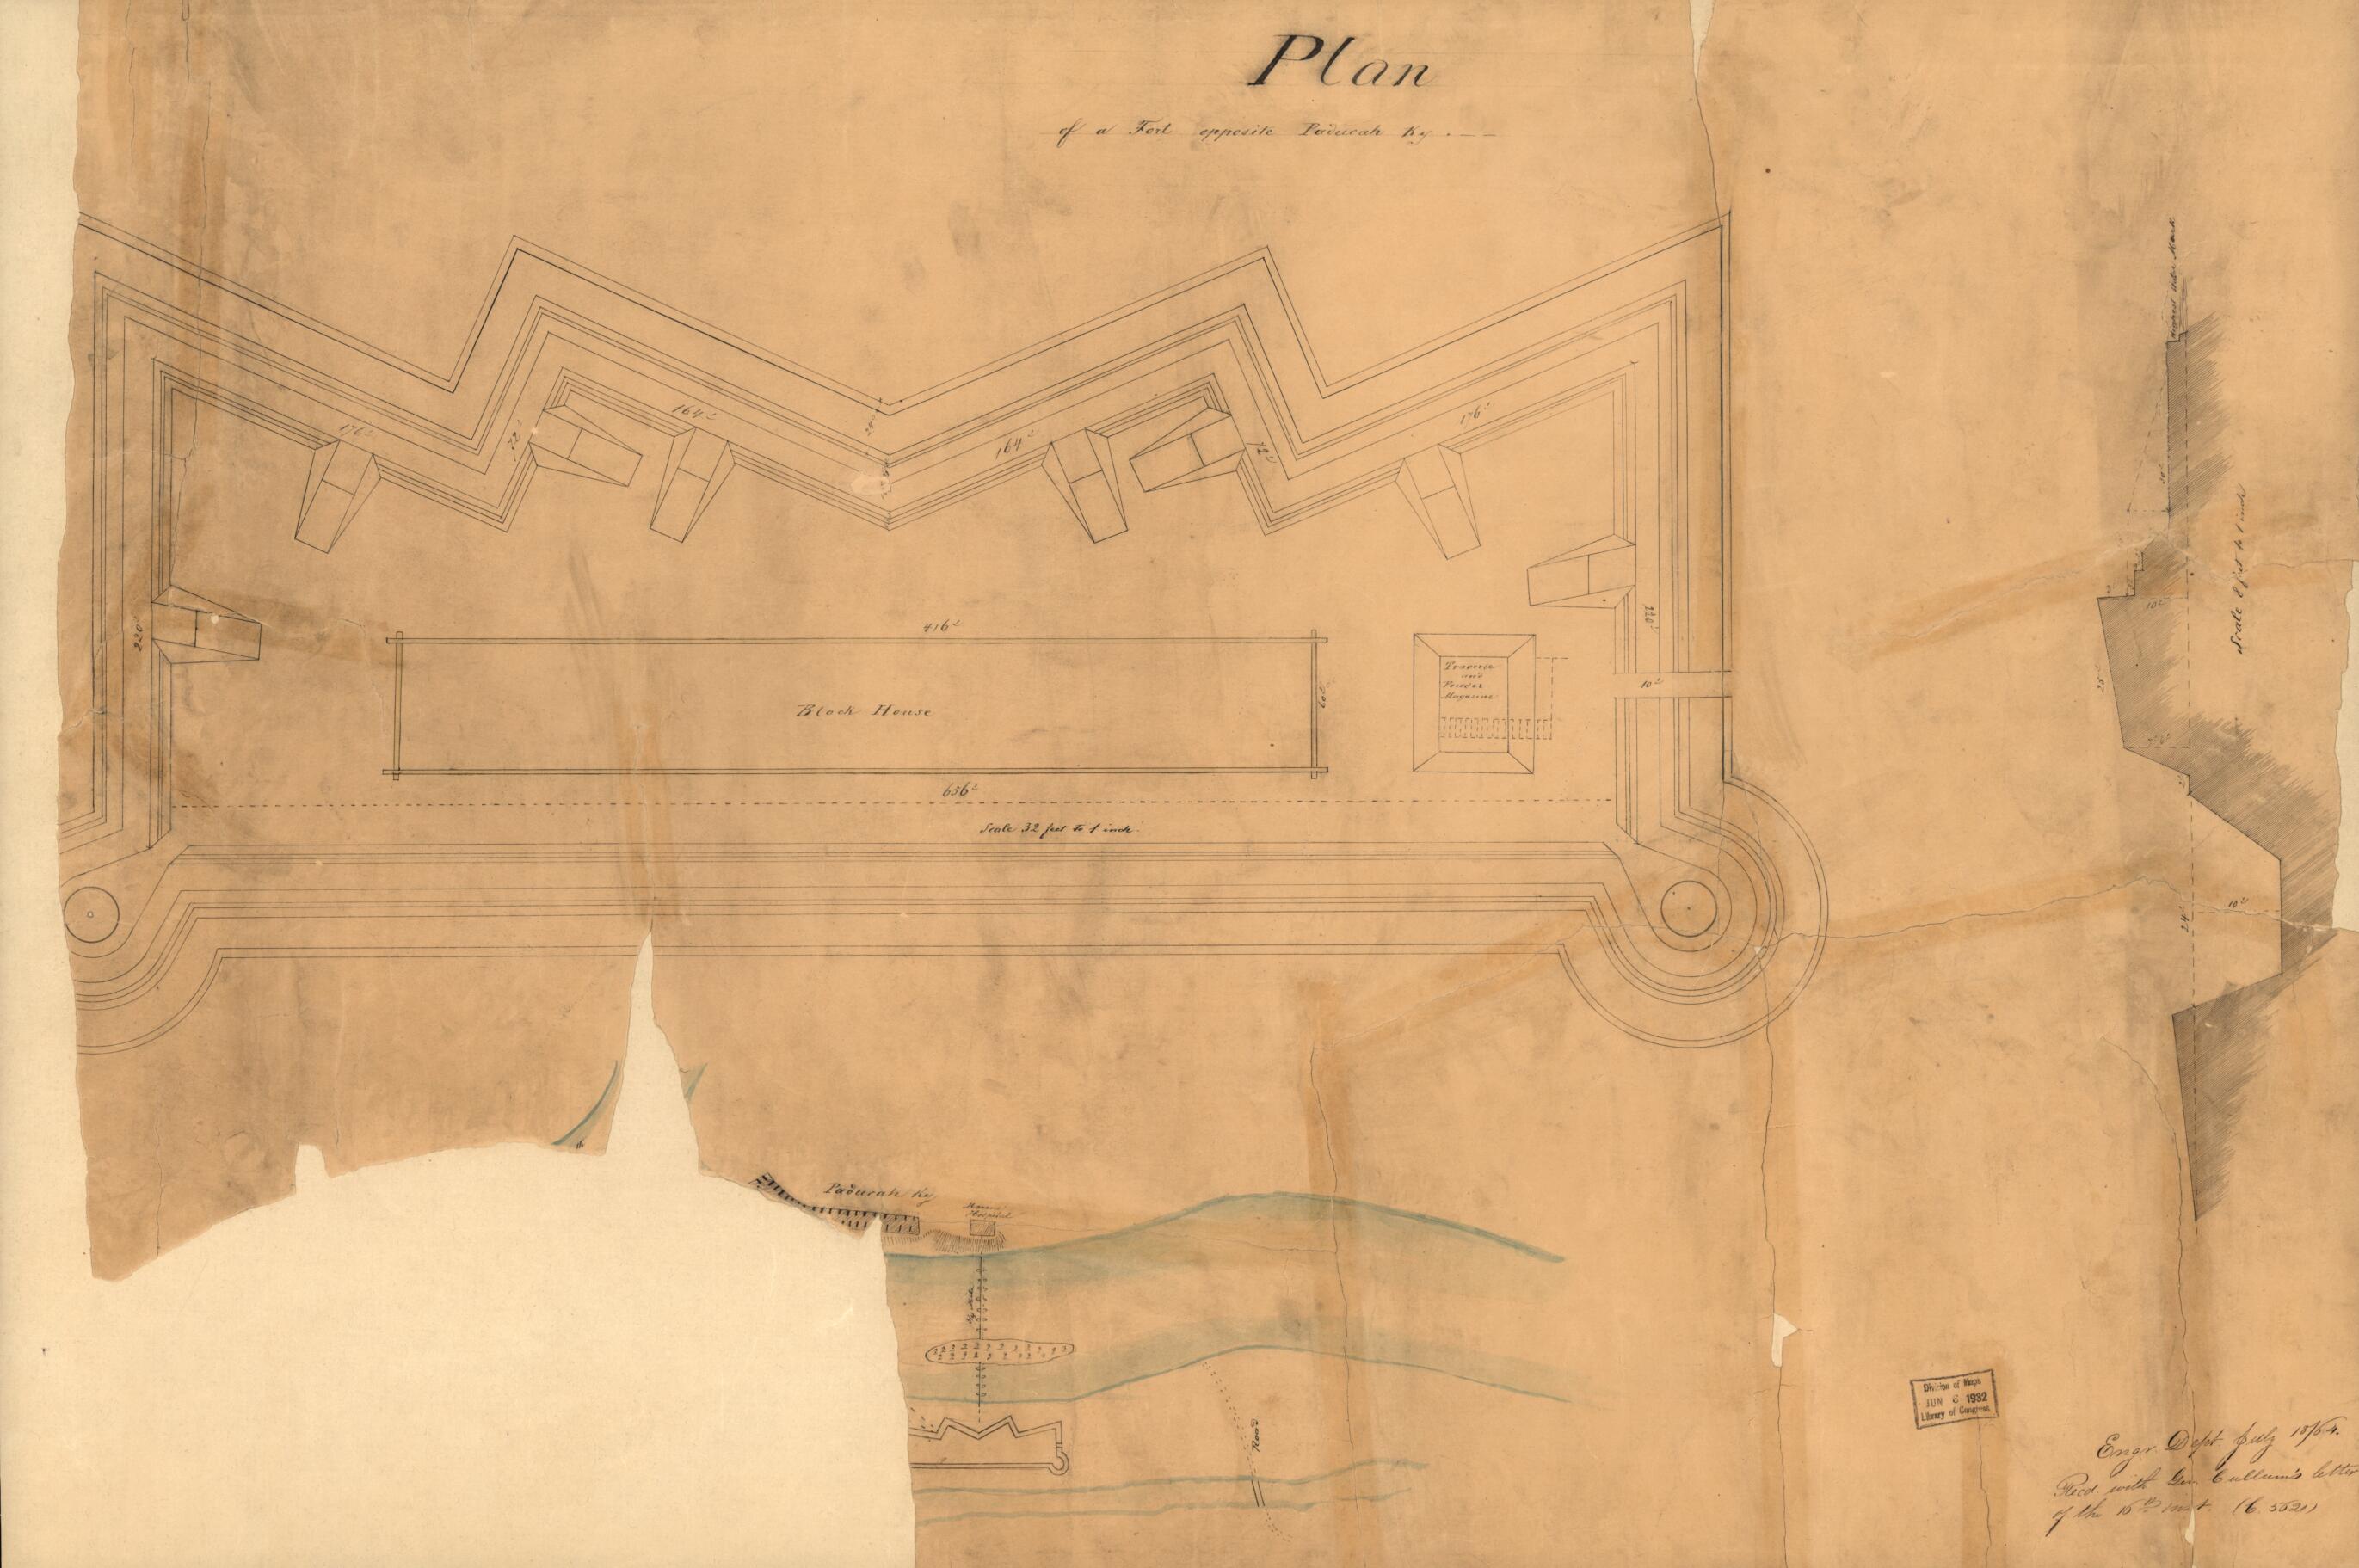 This old map of Plan of a Fort Opposite Paducah, Ky from 1864 was created by  in 1864